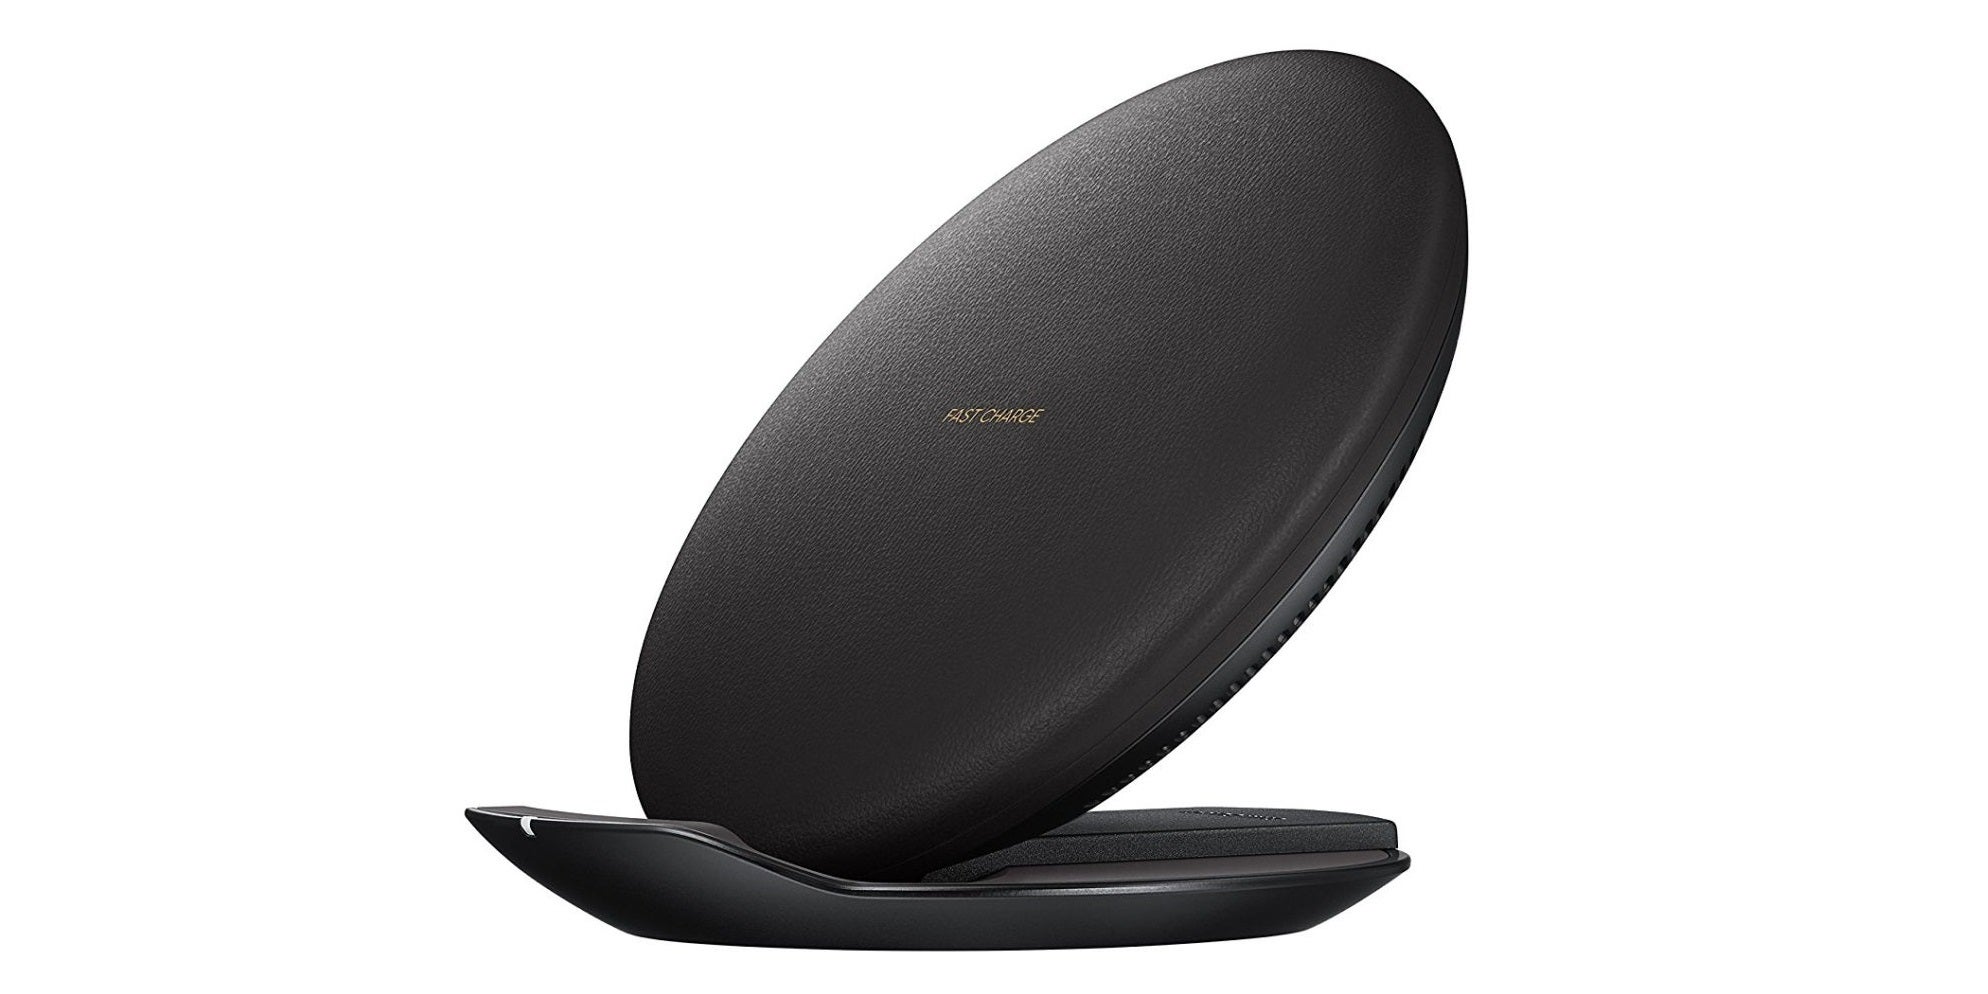 Samsung's fast wireless charger looks like a space dish - 8 fantastic Samsung Galaxy S8 features that went under the radar